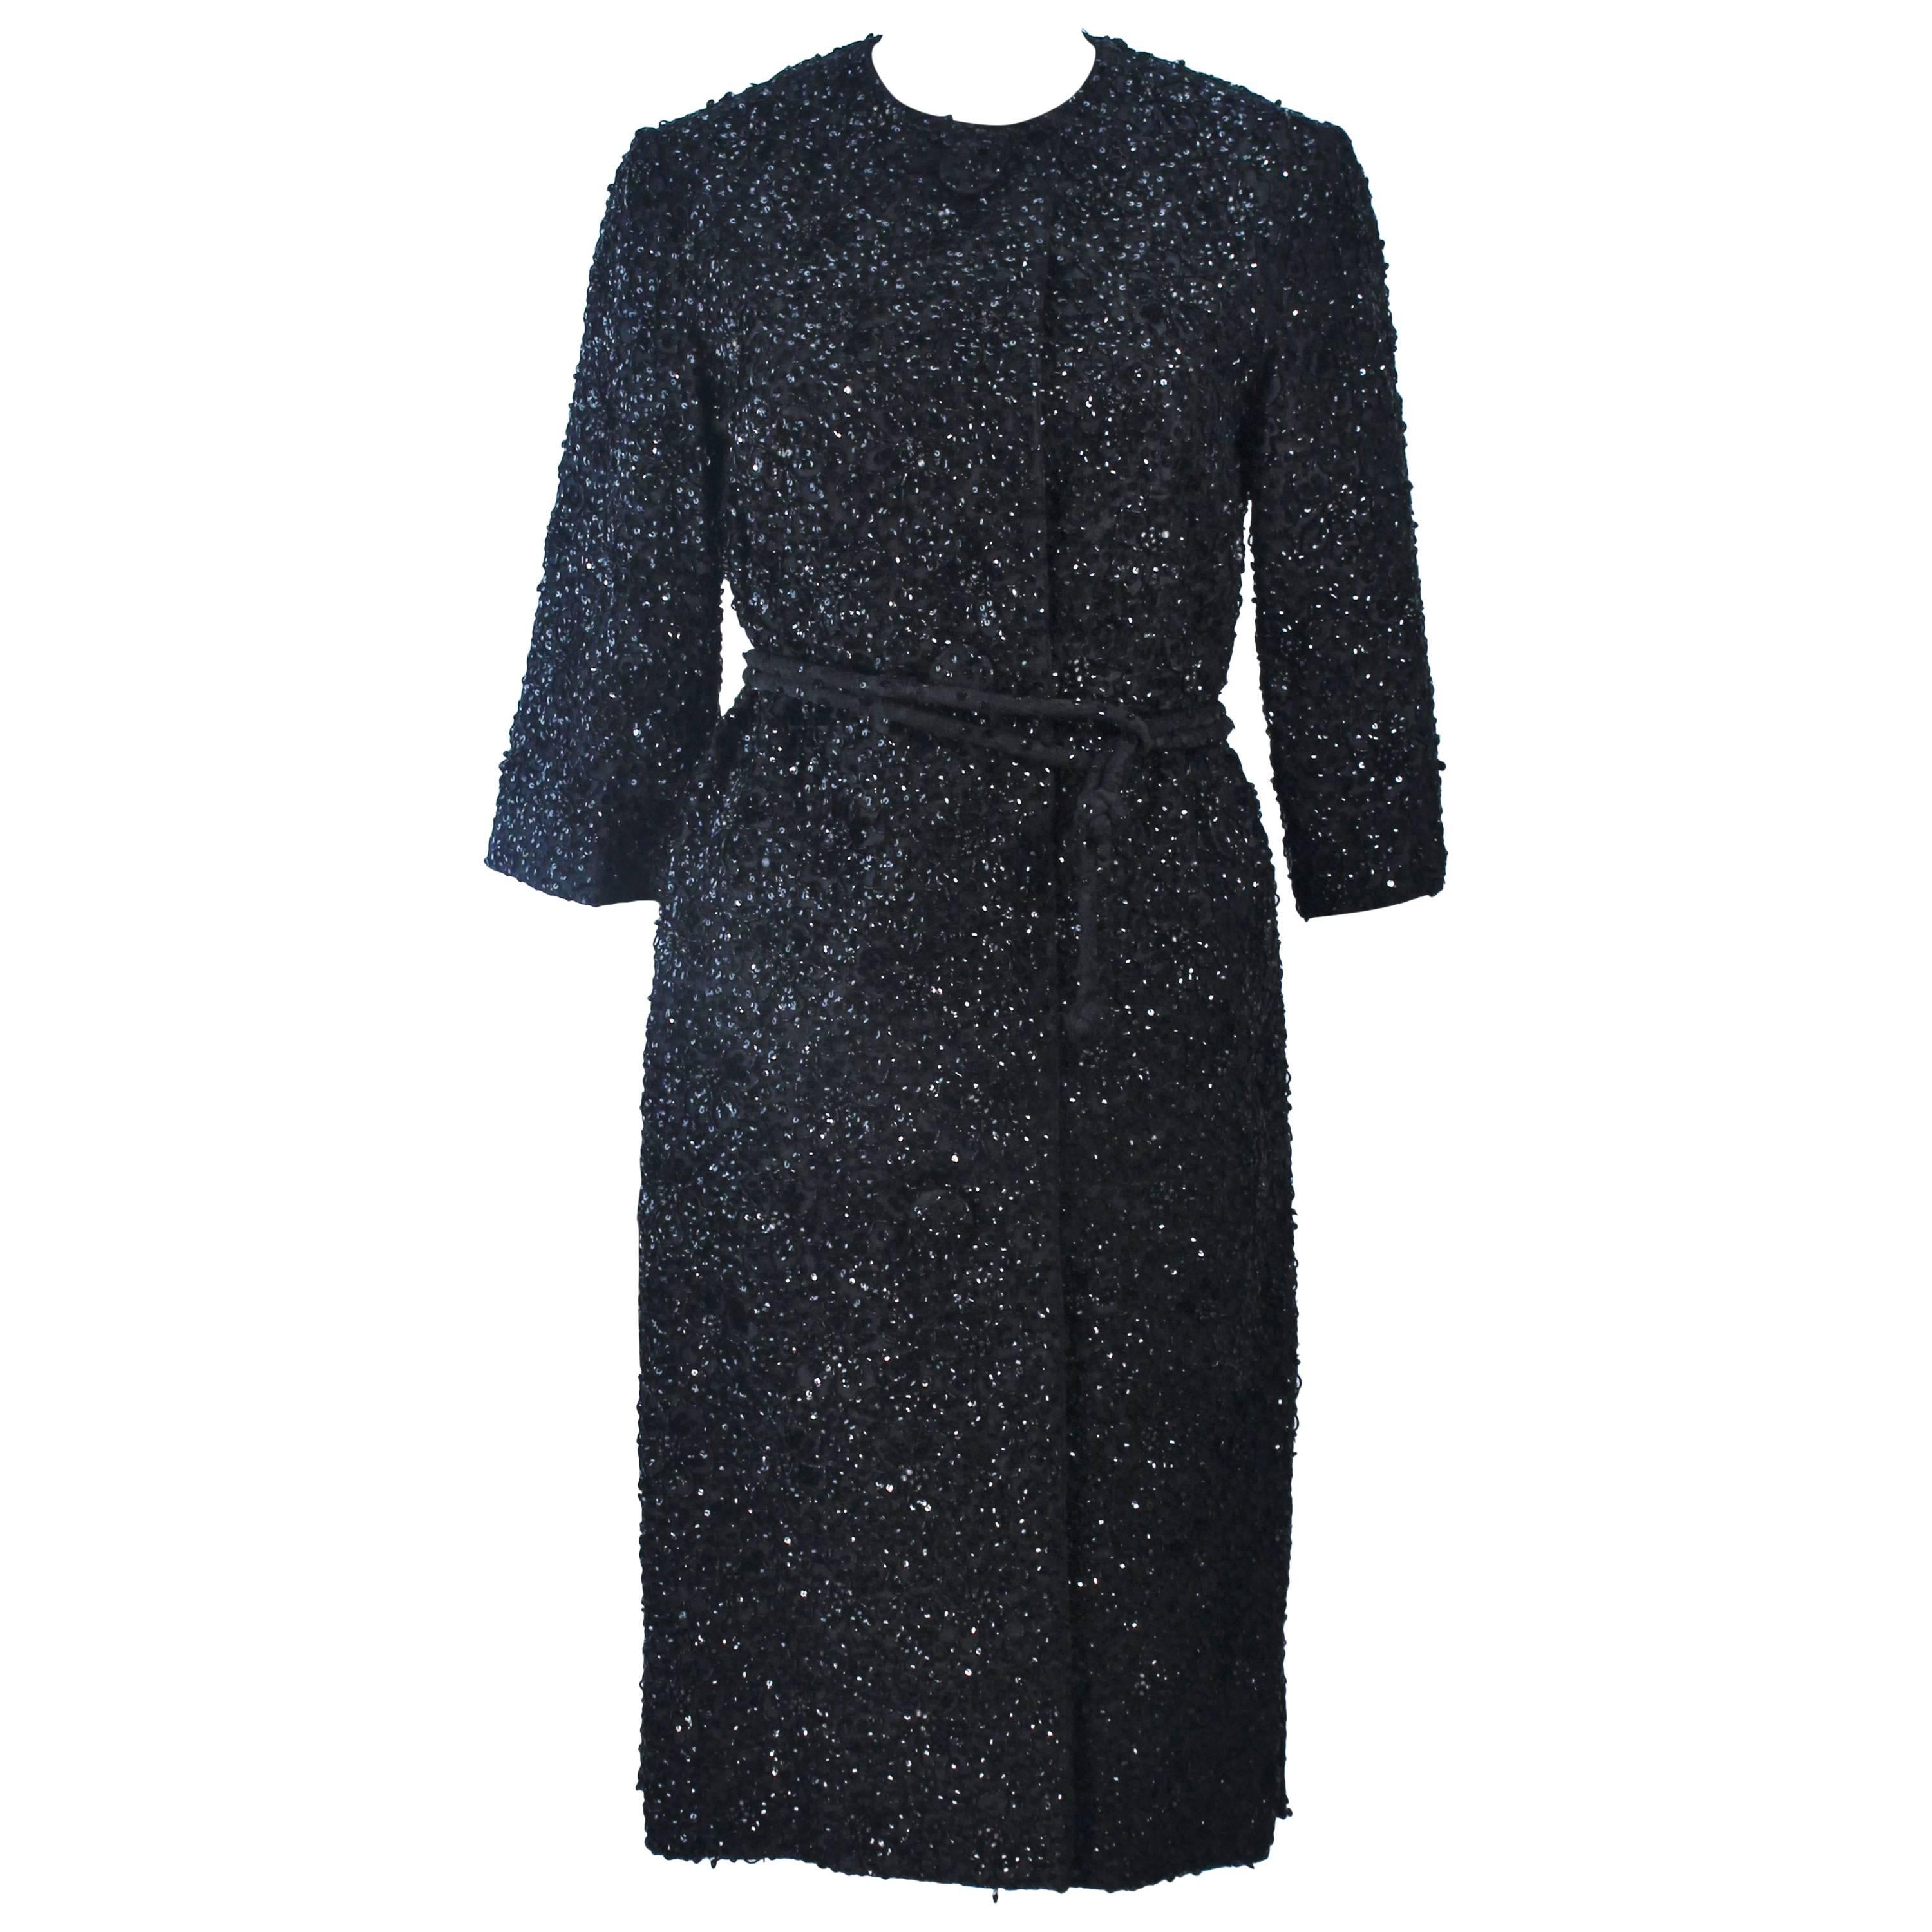 HAUTE COUTURE INTERNATIONAL 1960's Black Beaded Sequin Coat with Belt Size 6 For Sale